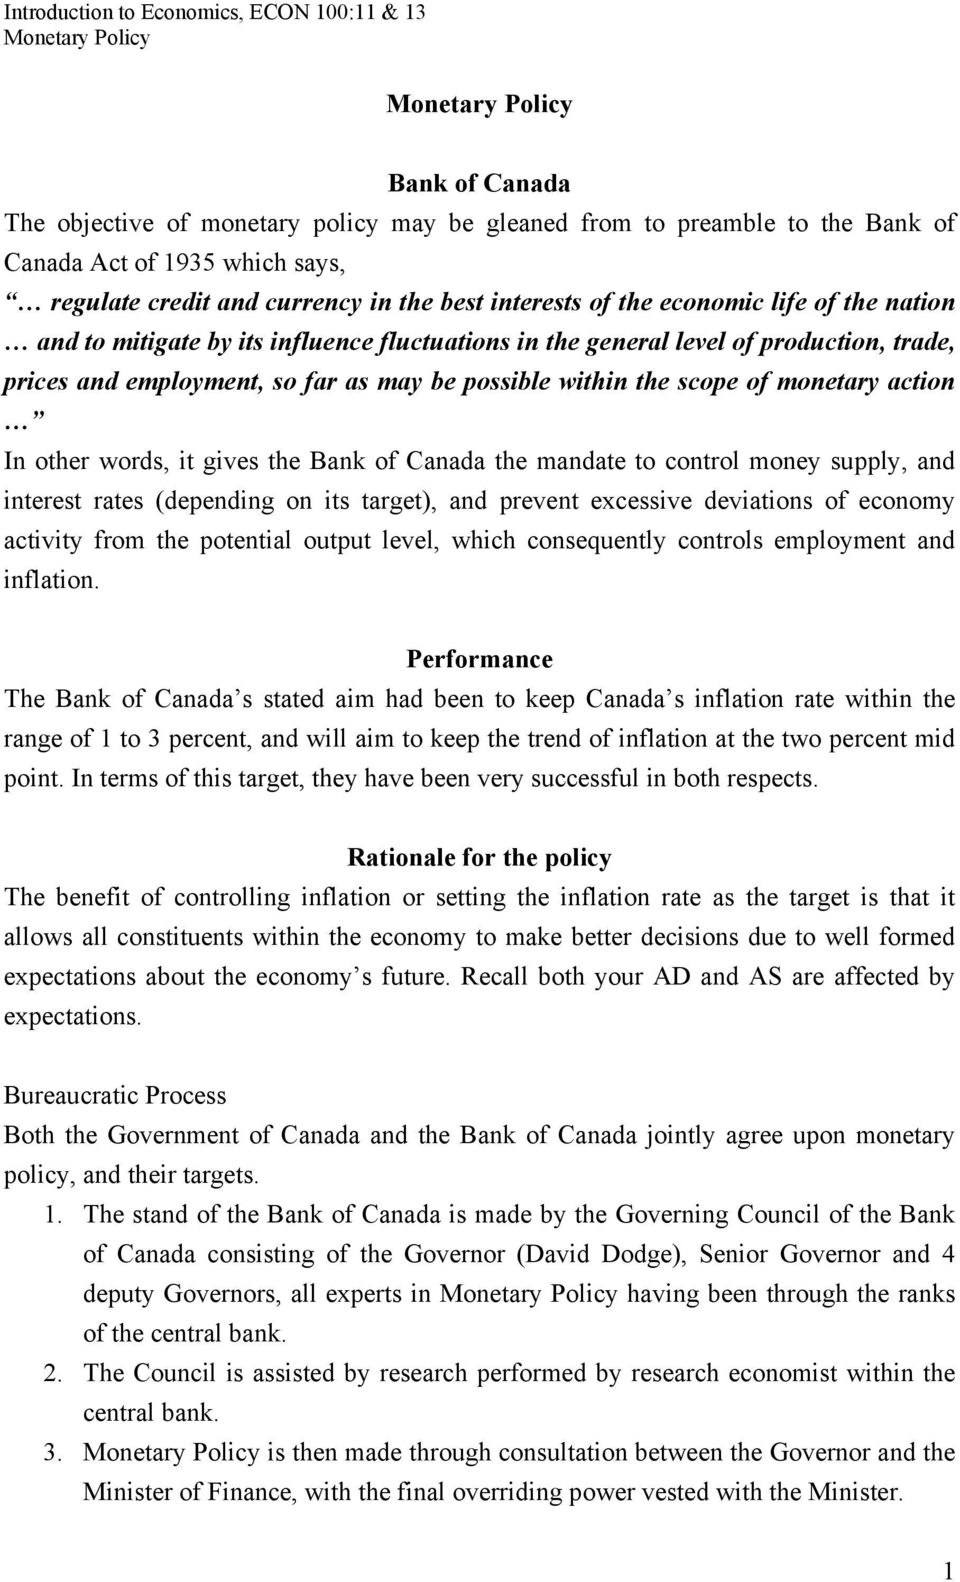 words, it gives the Bank of Canada the mandate to control money supply, and interest rates (depending on its target), and prevent excessive deviations of economy activity from the potential output